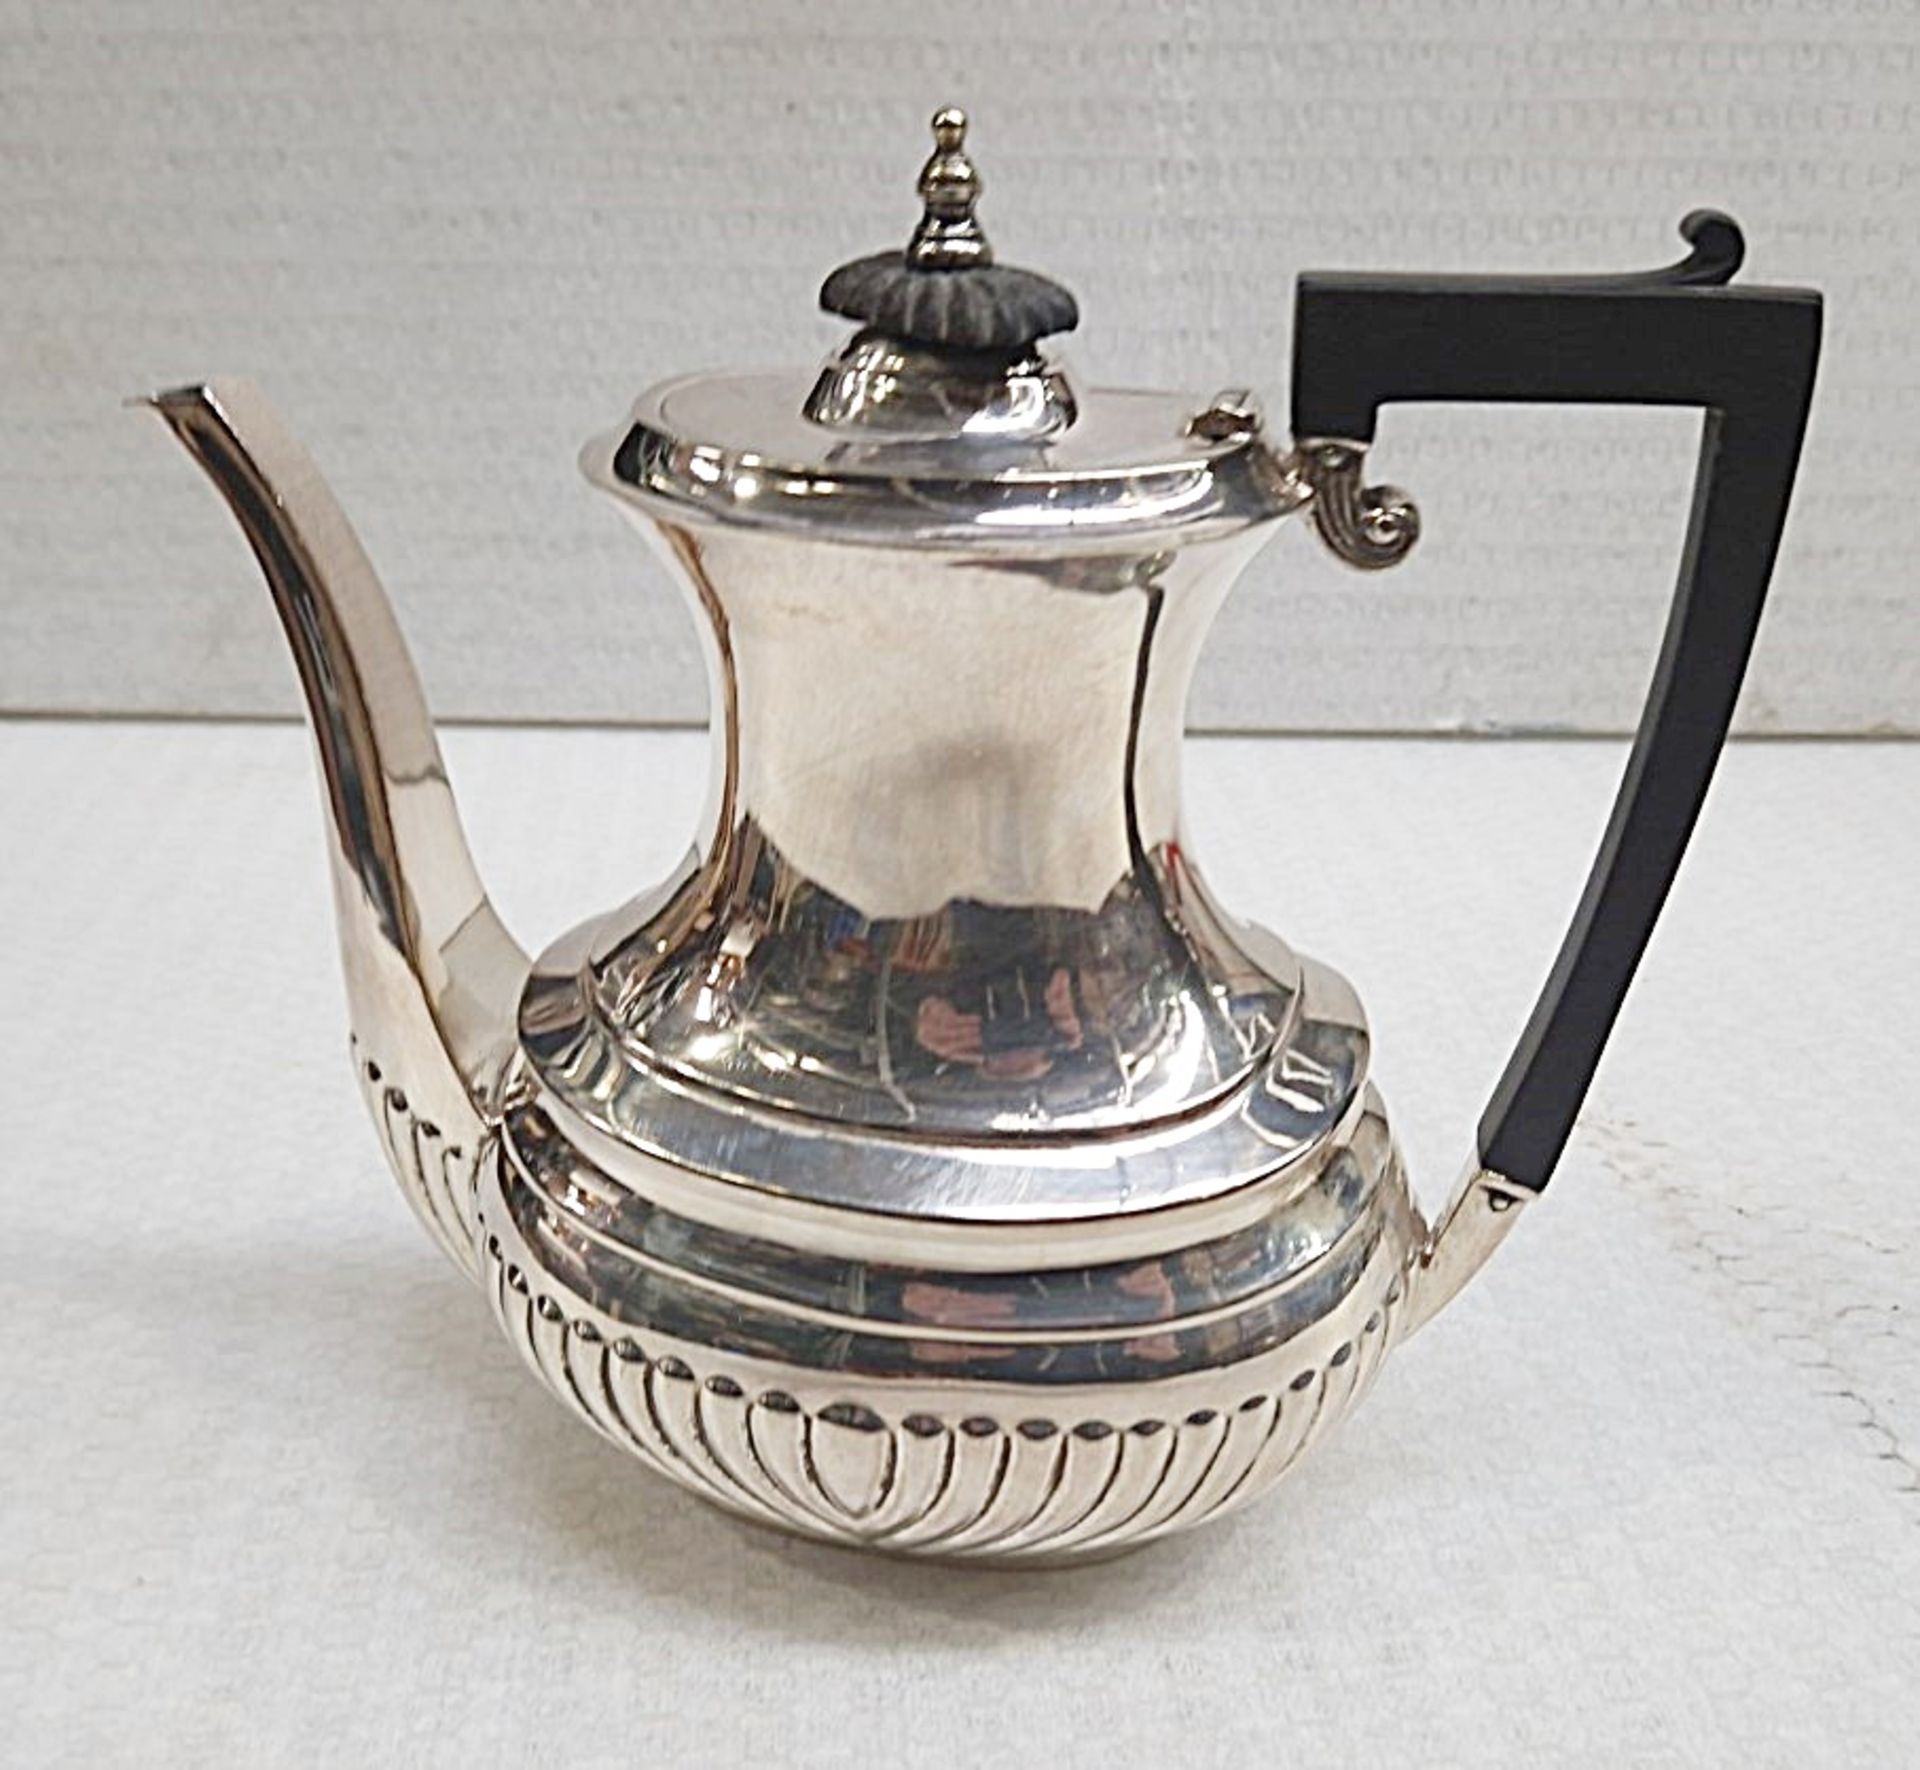 1 x Edwardian Style Silver Plated Tea Pot Set With Creamer and Sugar Pot - Bakelite details - Image 9 of 9